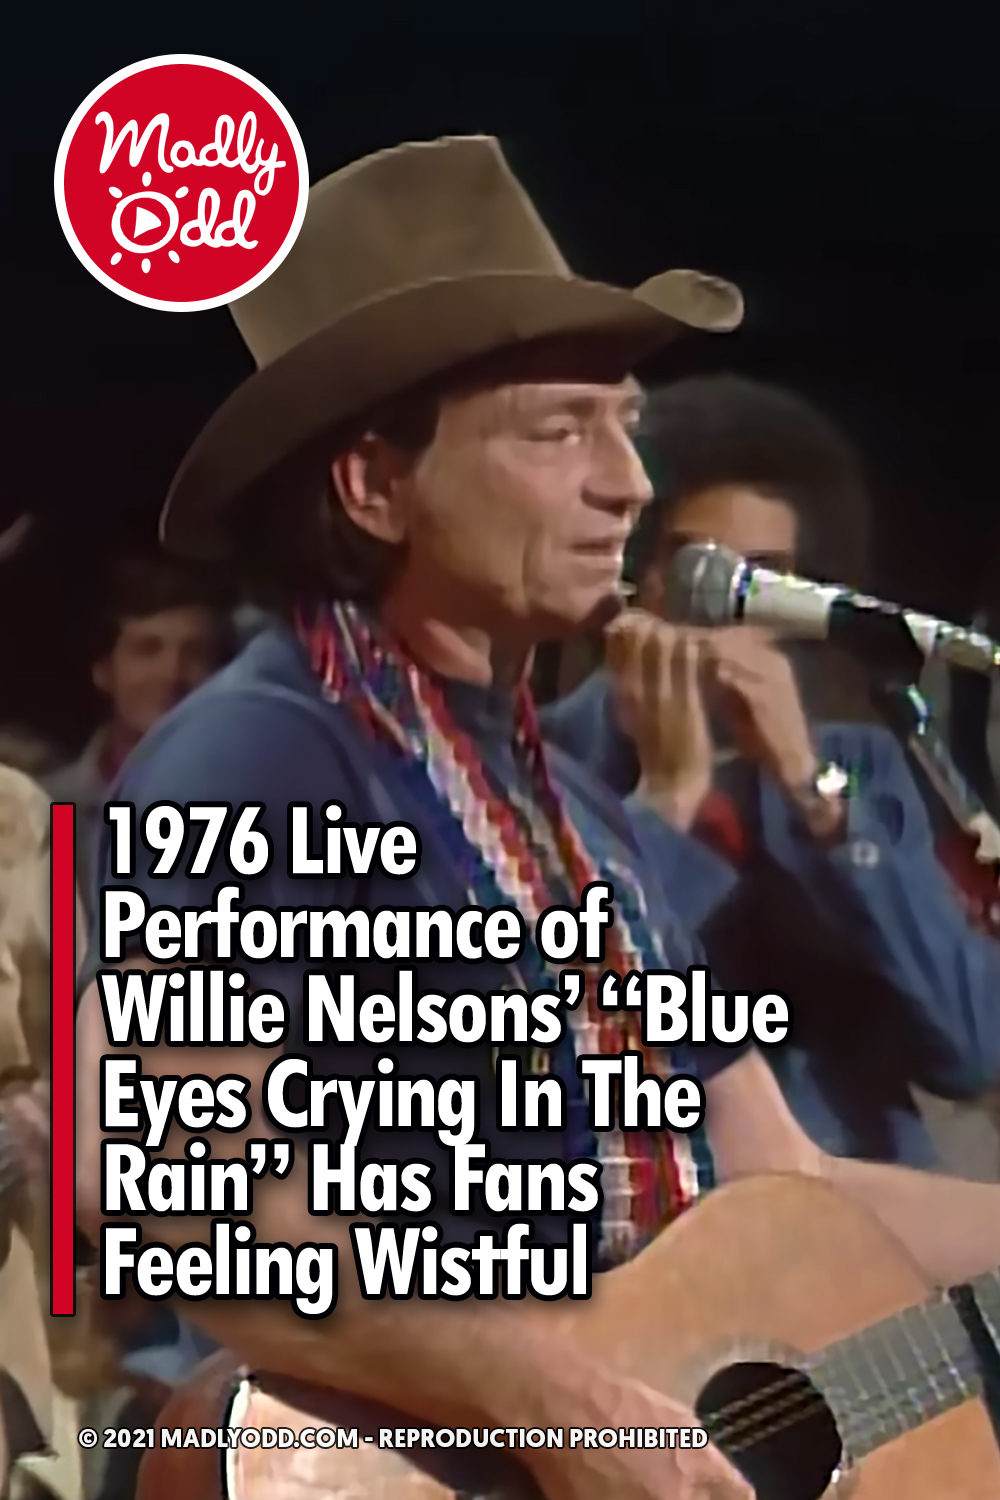 1976 Live Performance of Willie Nelsons’ “Blue Eyes Crying In The Rain” Has Fans Feeling Wistful